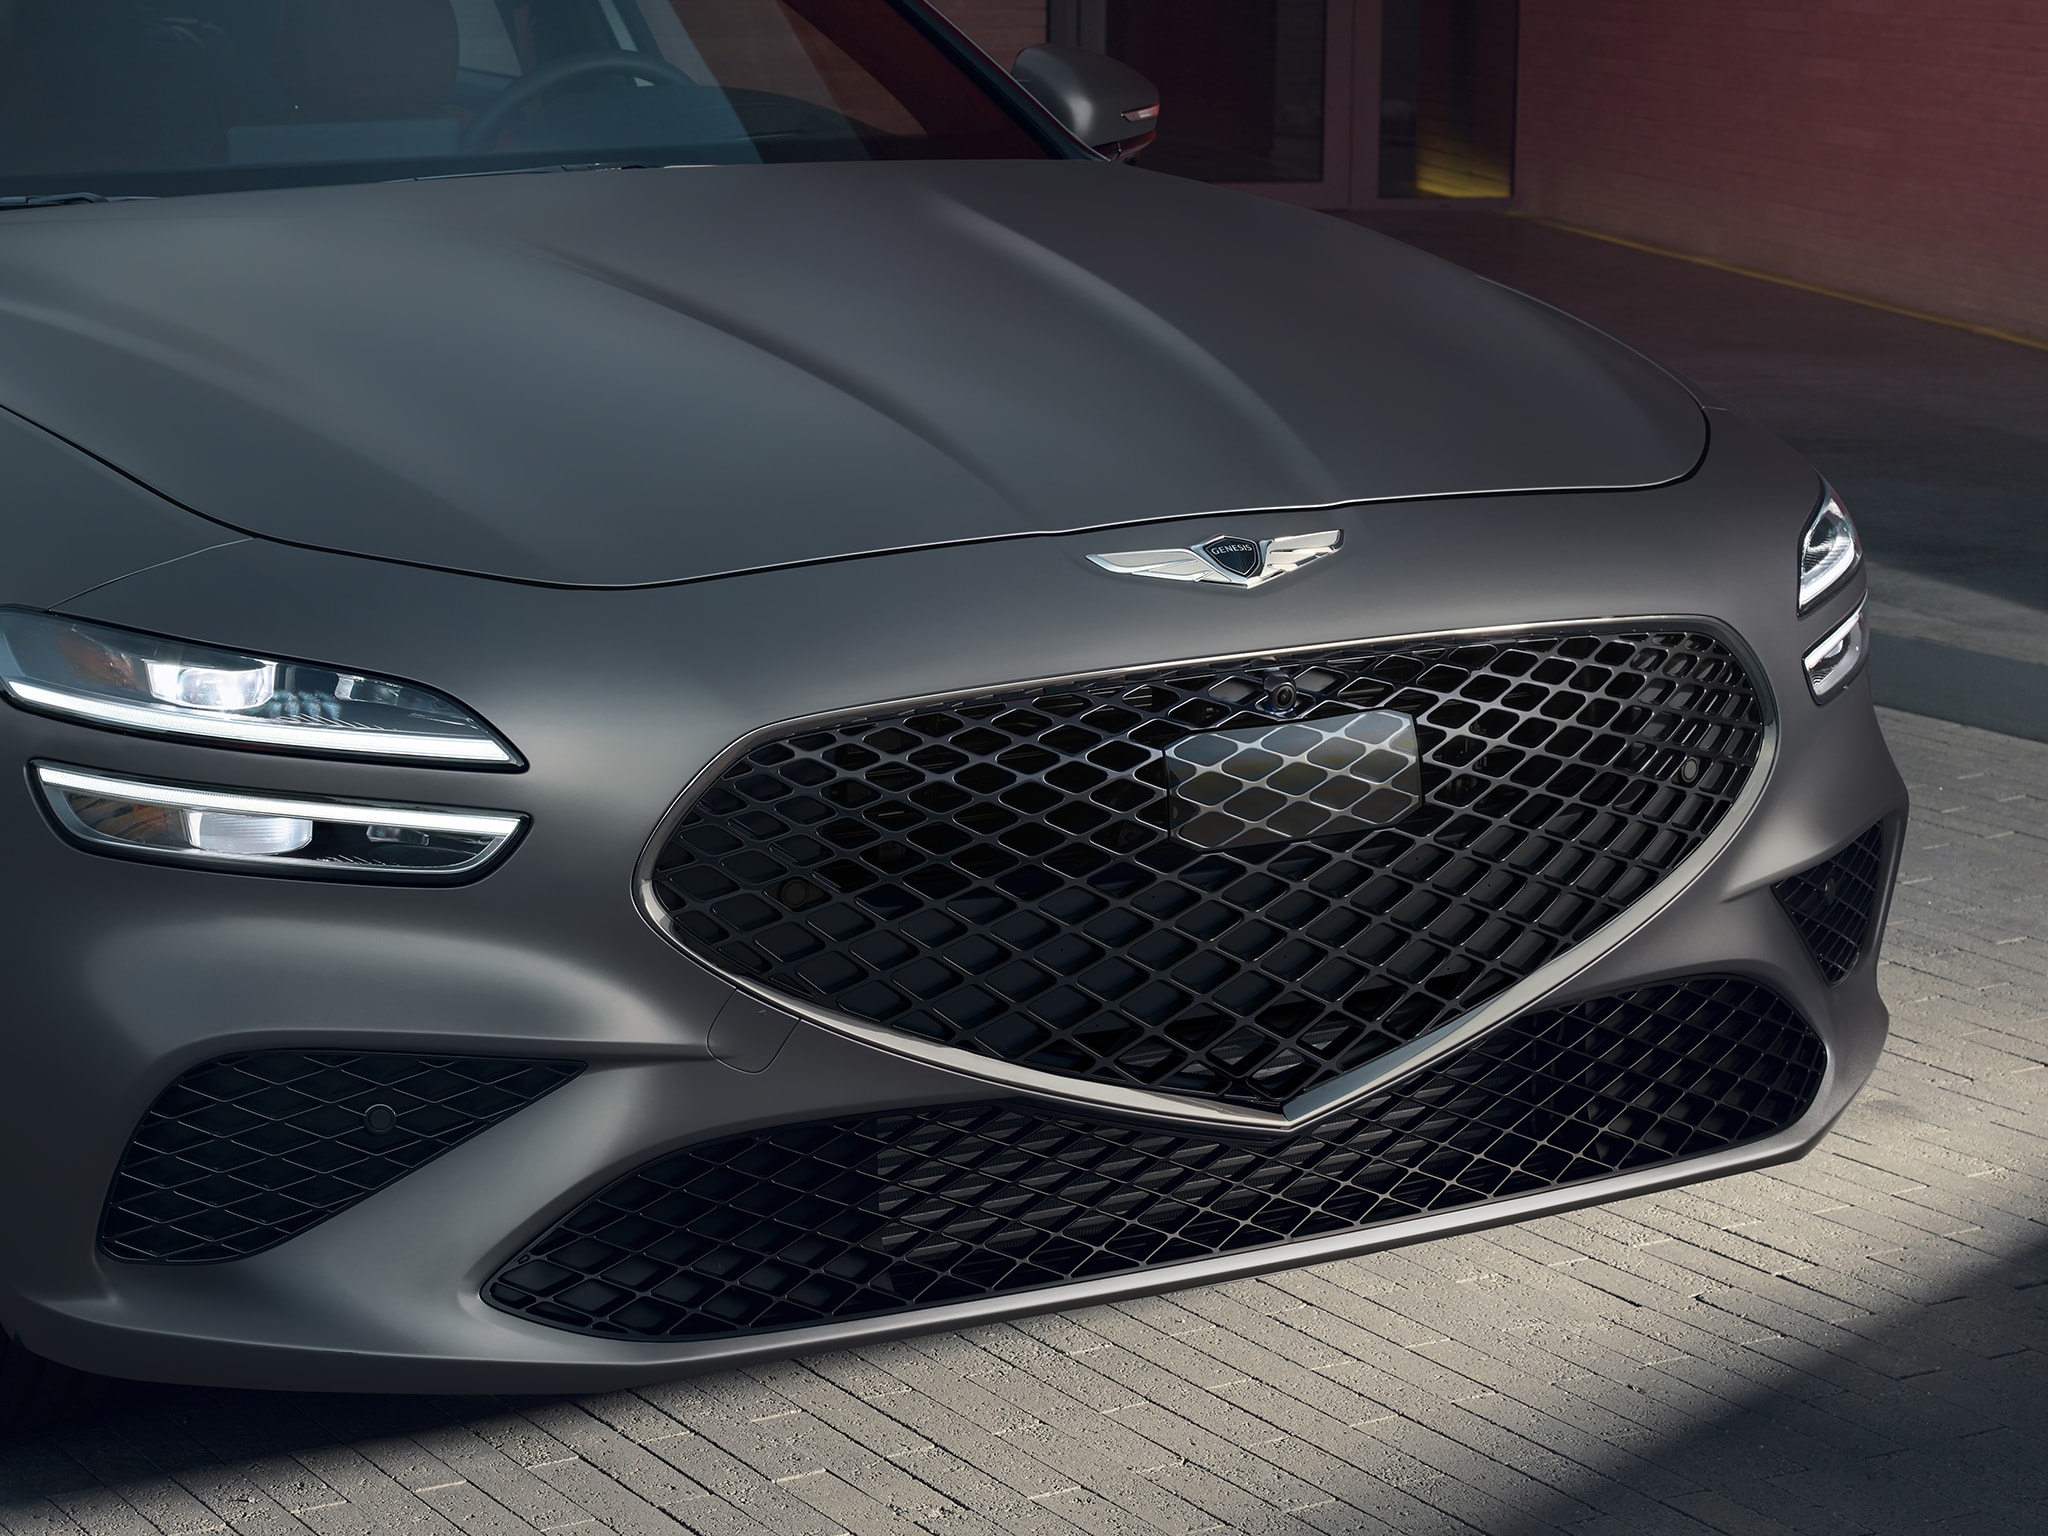 2022 Genesis G70 with crest grille and highway driving assist radar.